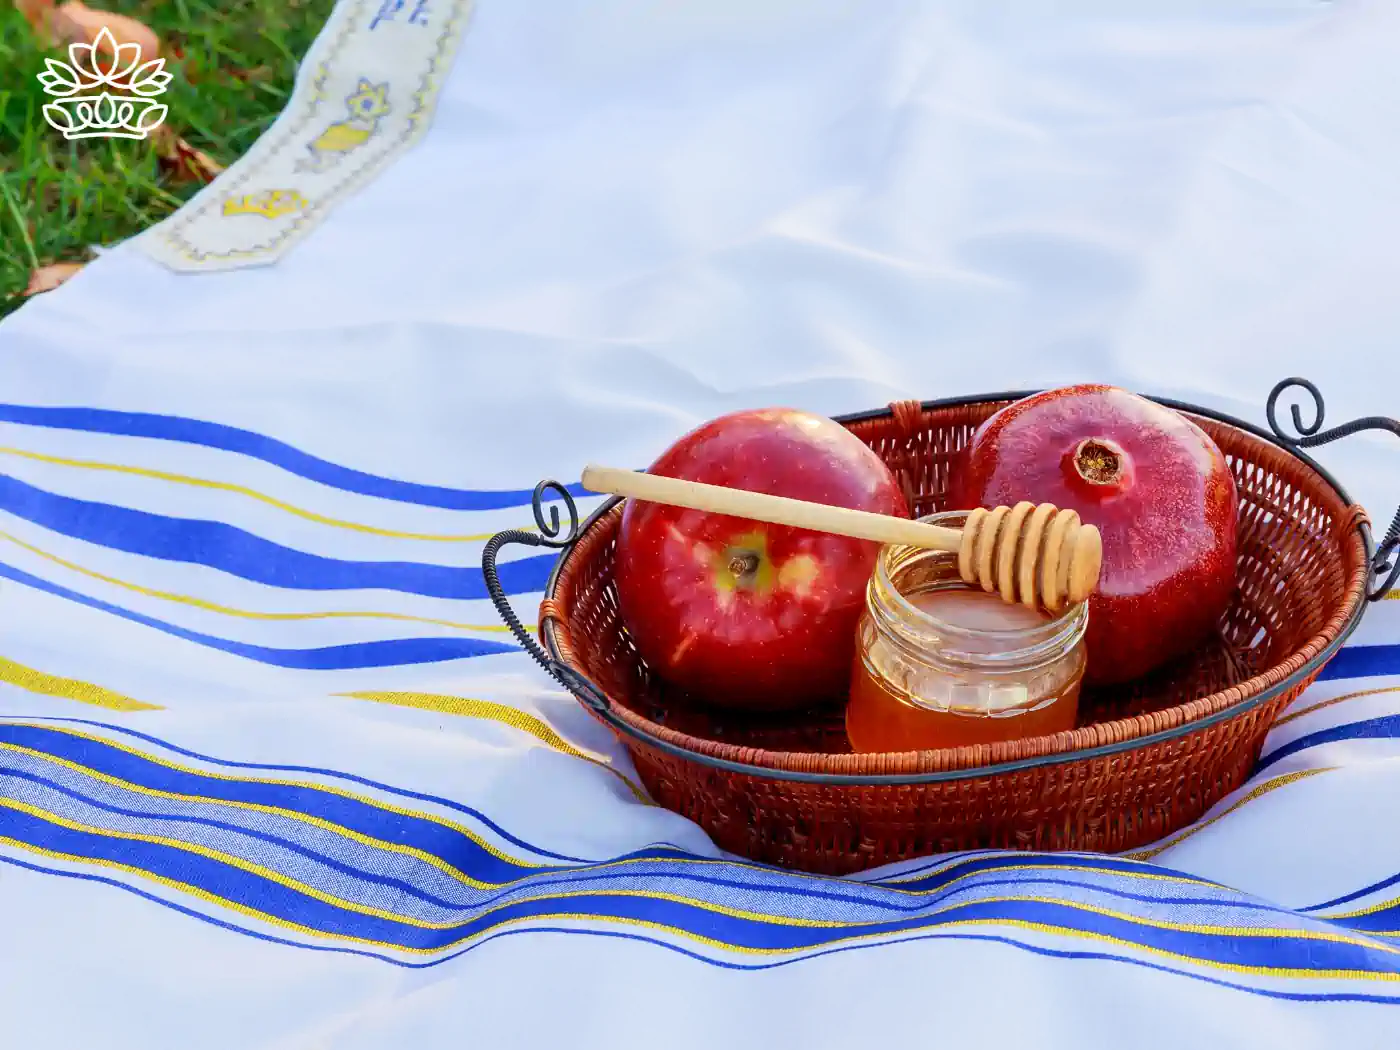 A basket with red apples and a jar of honey on a traditional cloth outdoors - Fabulous Flowers and Gifts, Rosh Hashanah Flowers Collection.